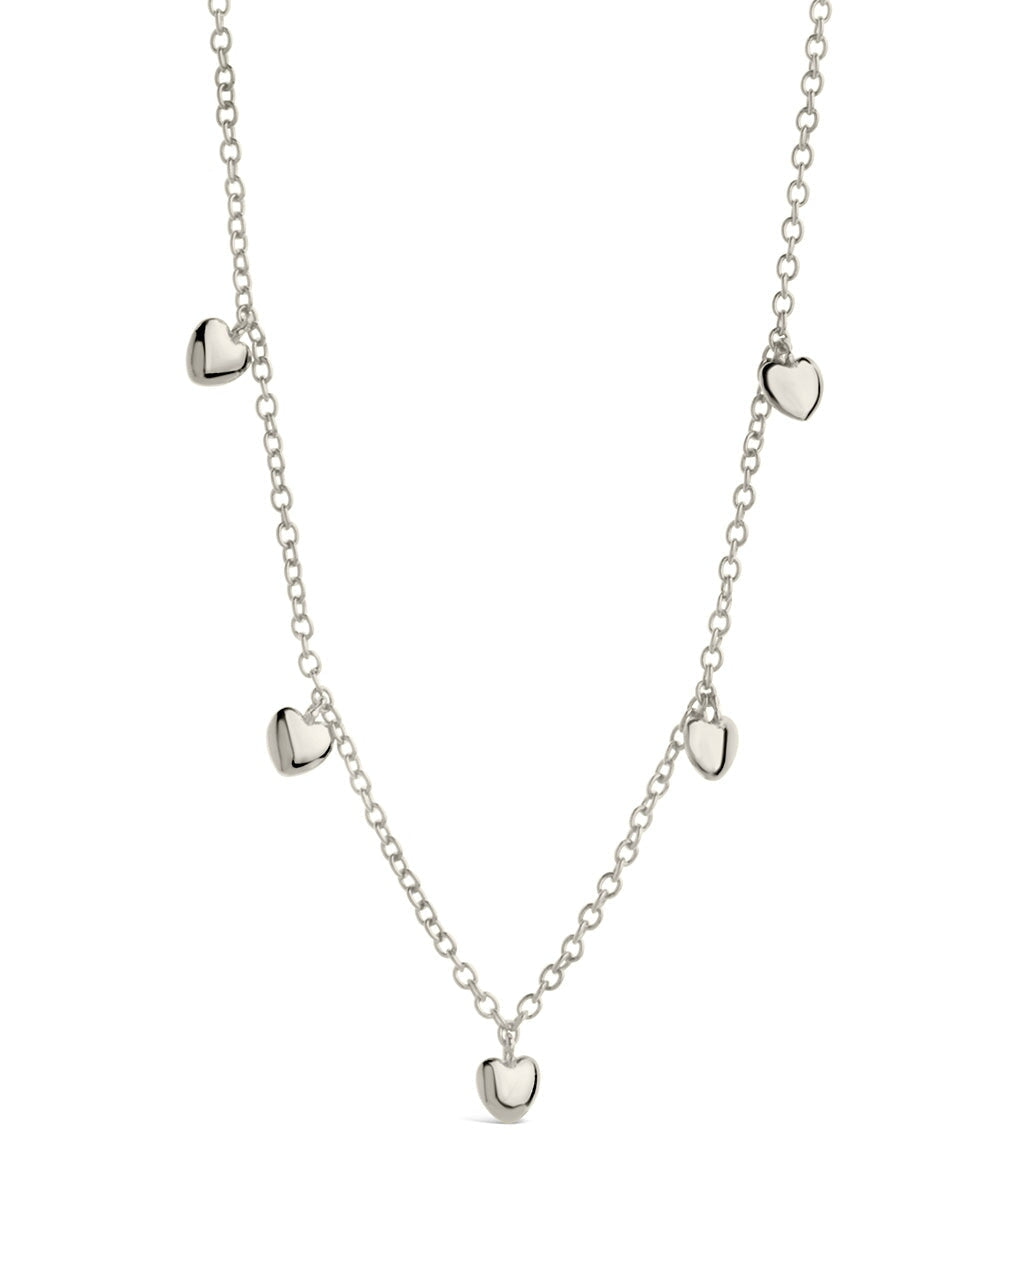 Stationed Heart Charm Necklace Necklace Sterling Forever Silver 